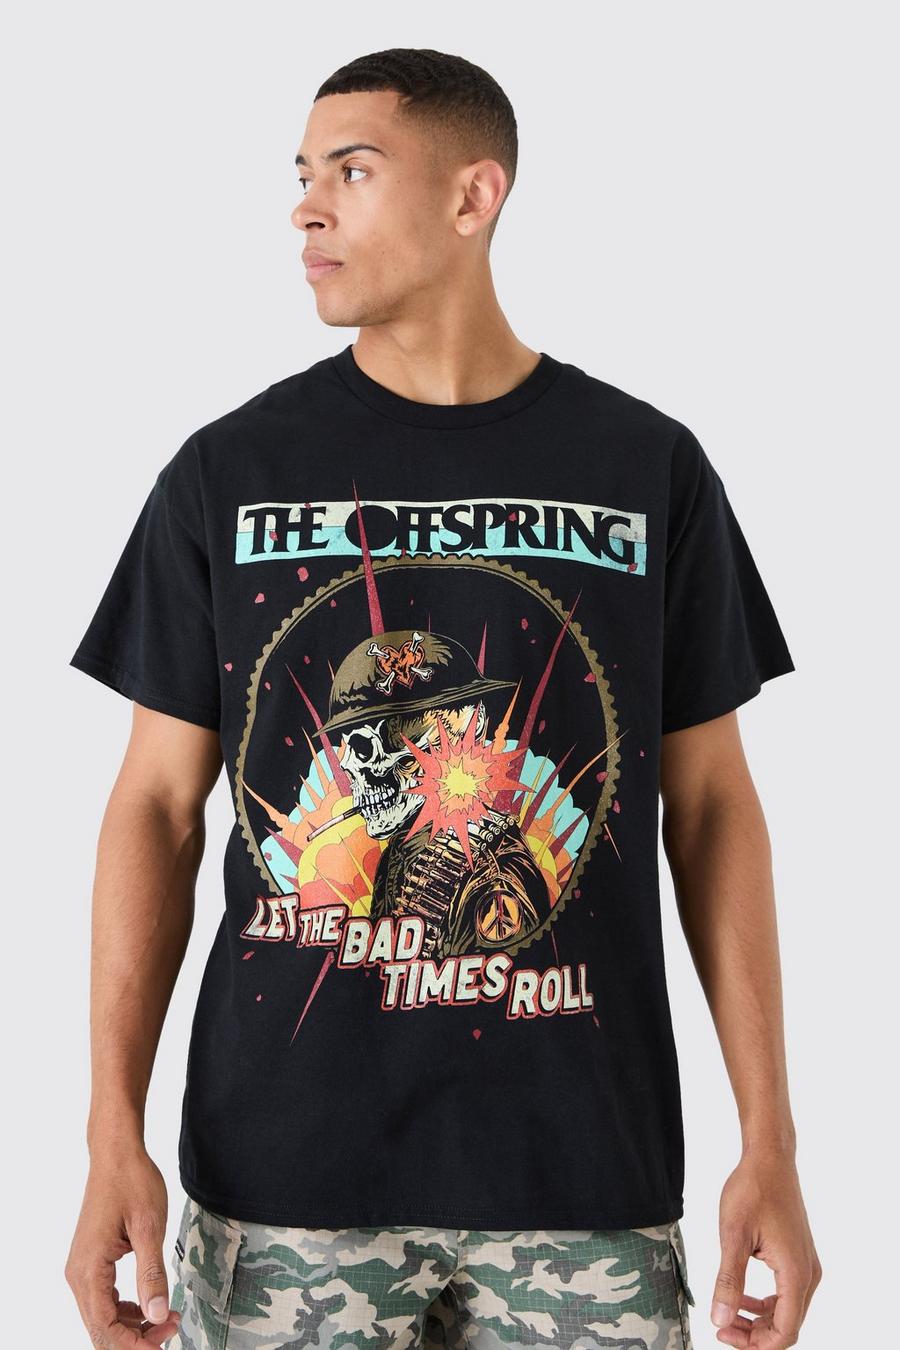 T-shirt comoda ufficiale The Offspring Band, Black